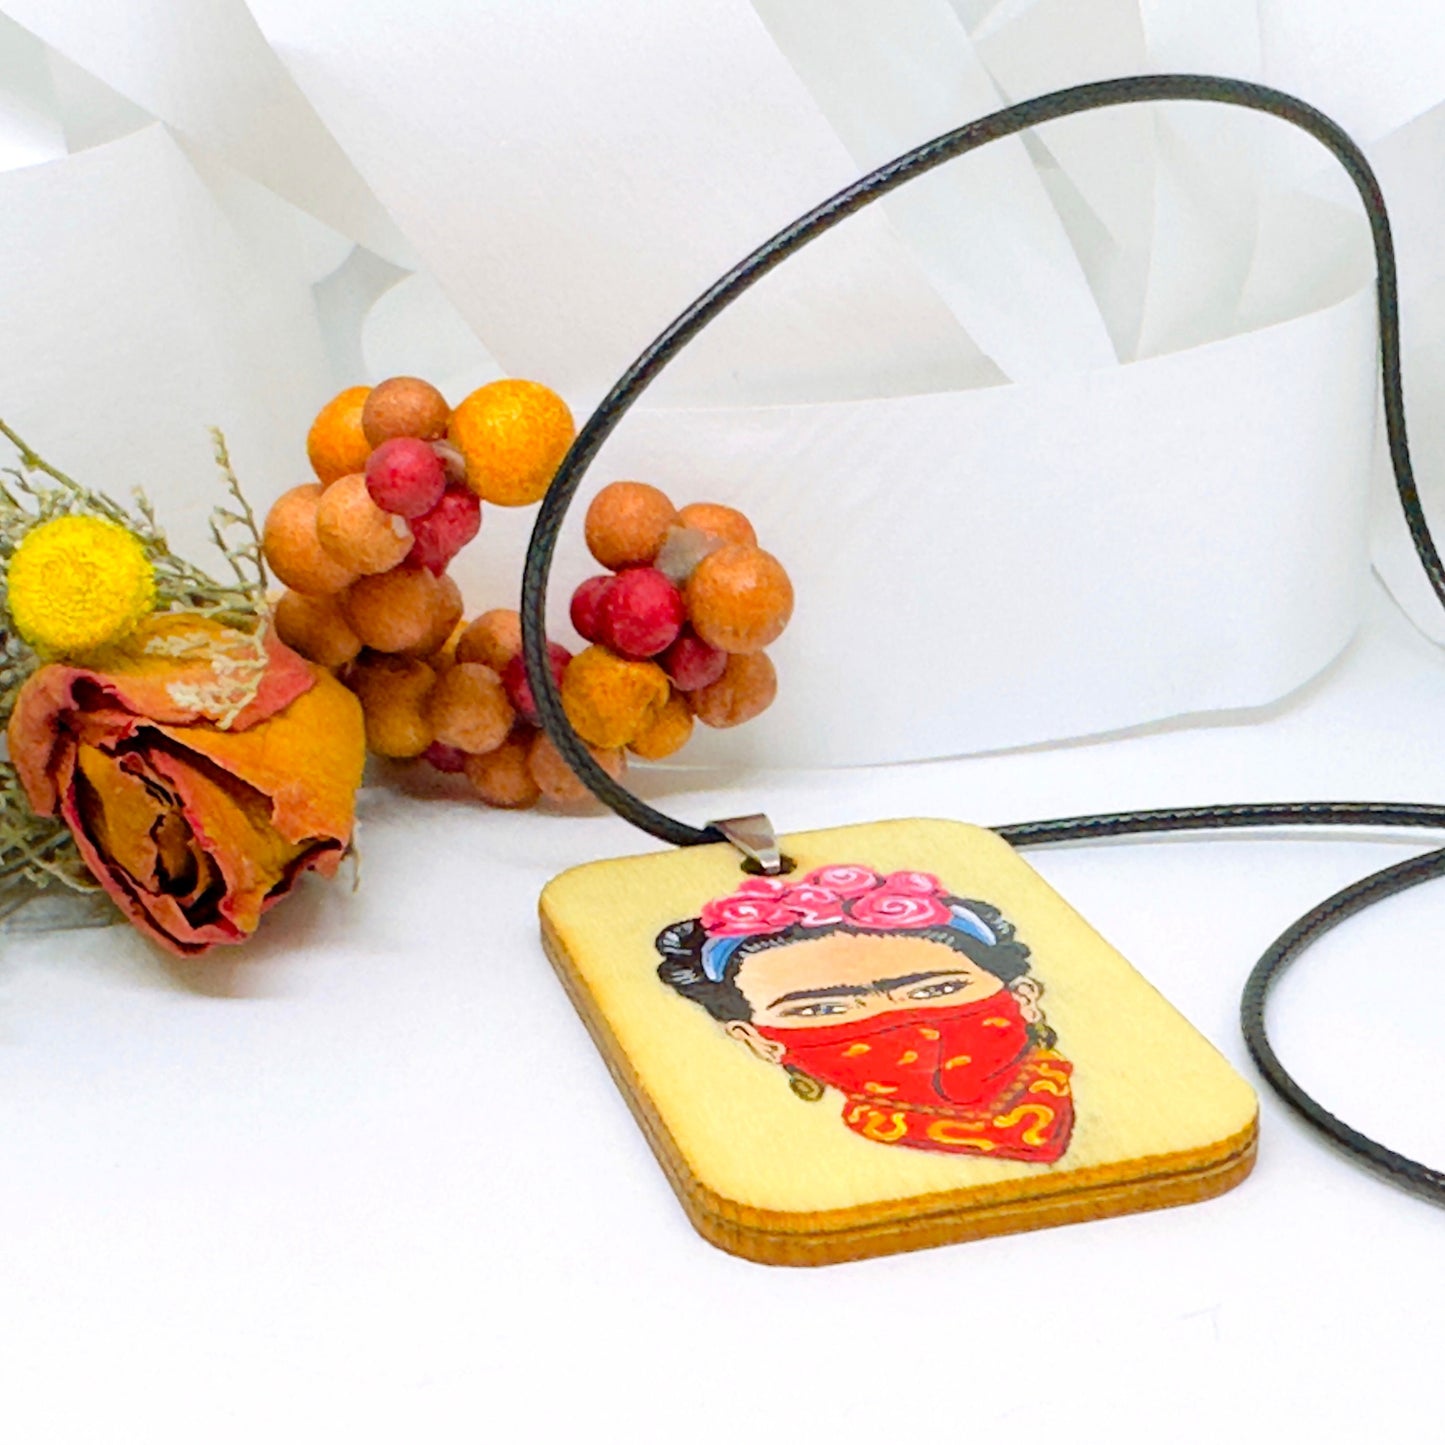 Feminist Frida Pendant Necklace Hand Painted Wooden Frida Necklace Wearable Art Women Frida Jewelry Artwear Mexican Jewelry Frida Art Gift